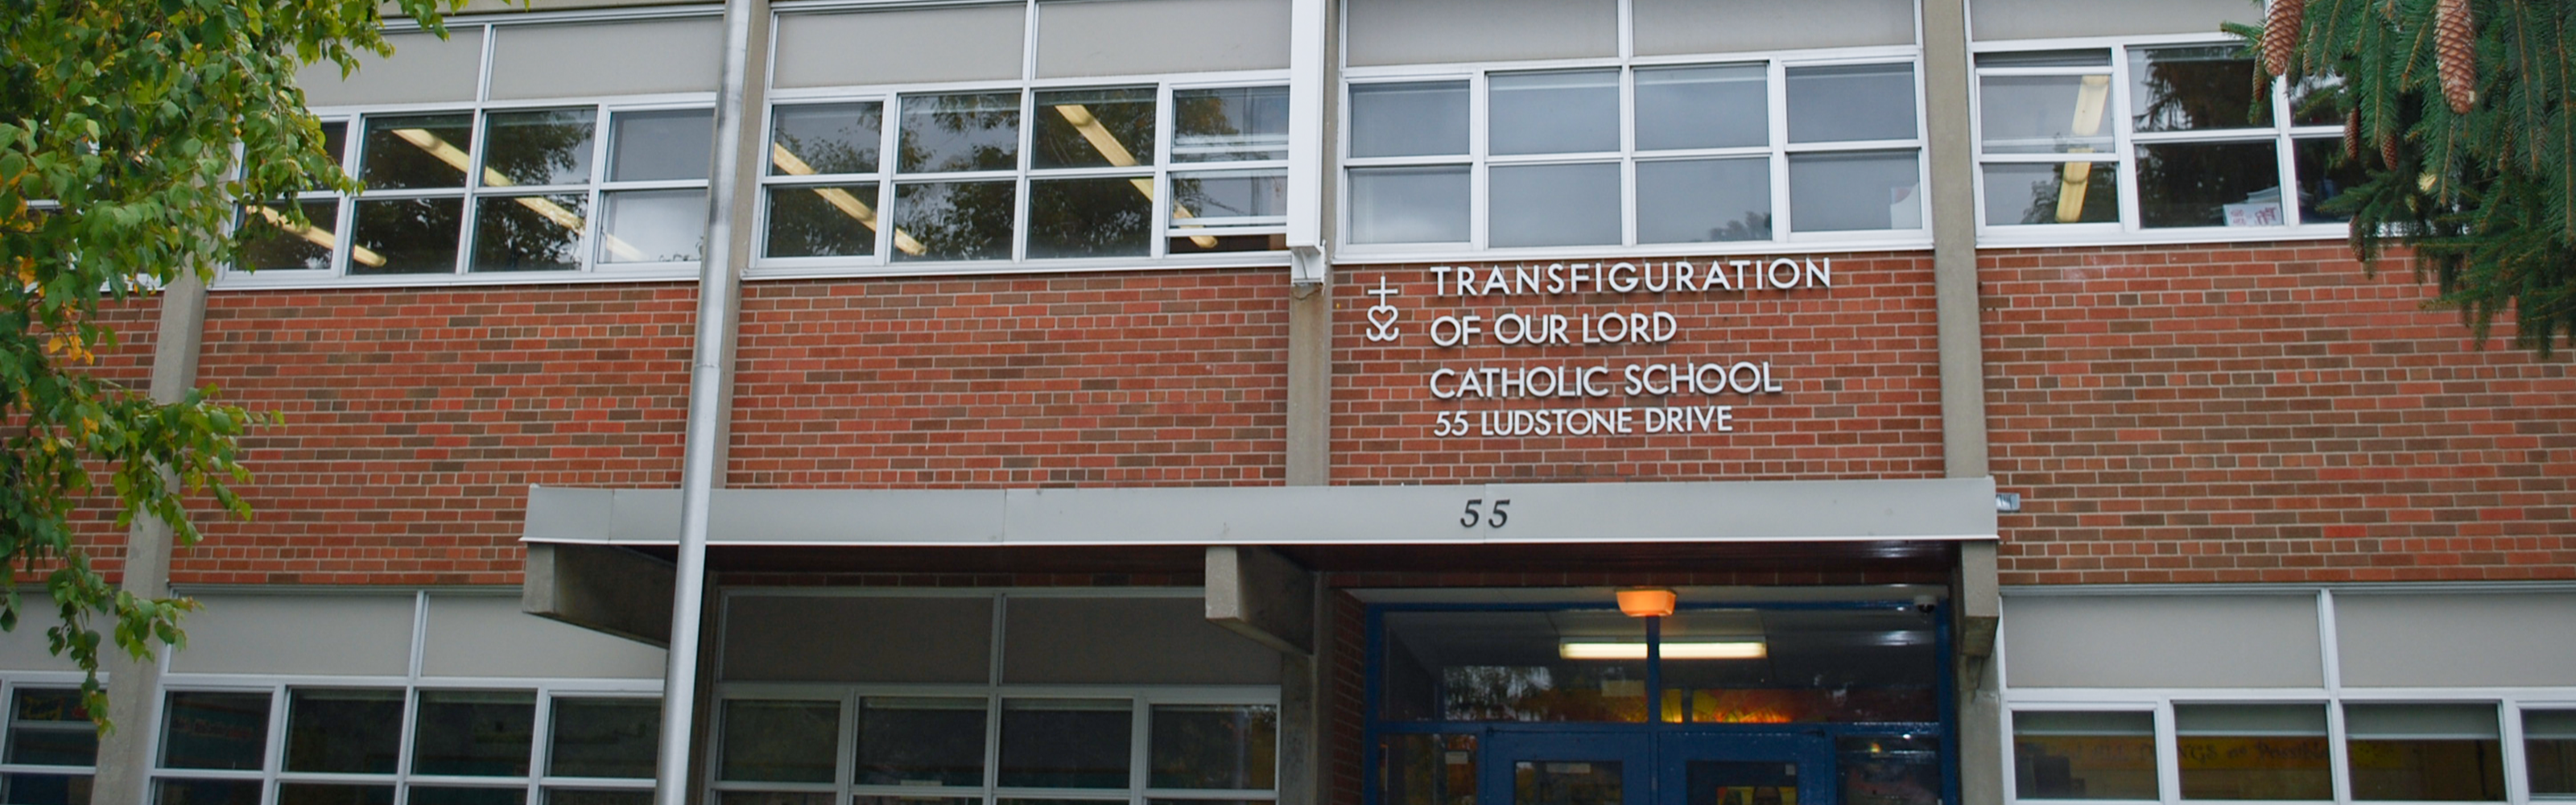 The front of the Transfiguration of Our Lord Catholic School building.